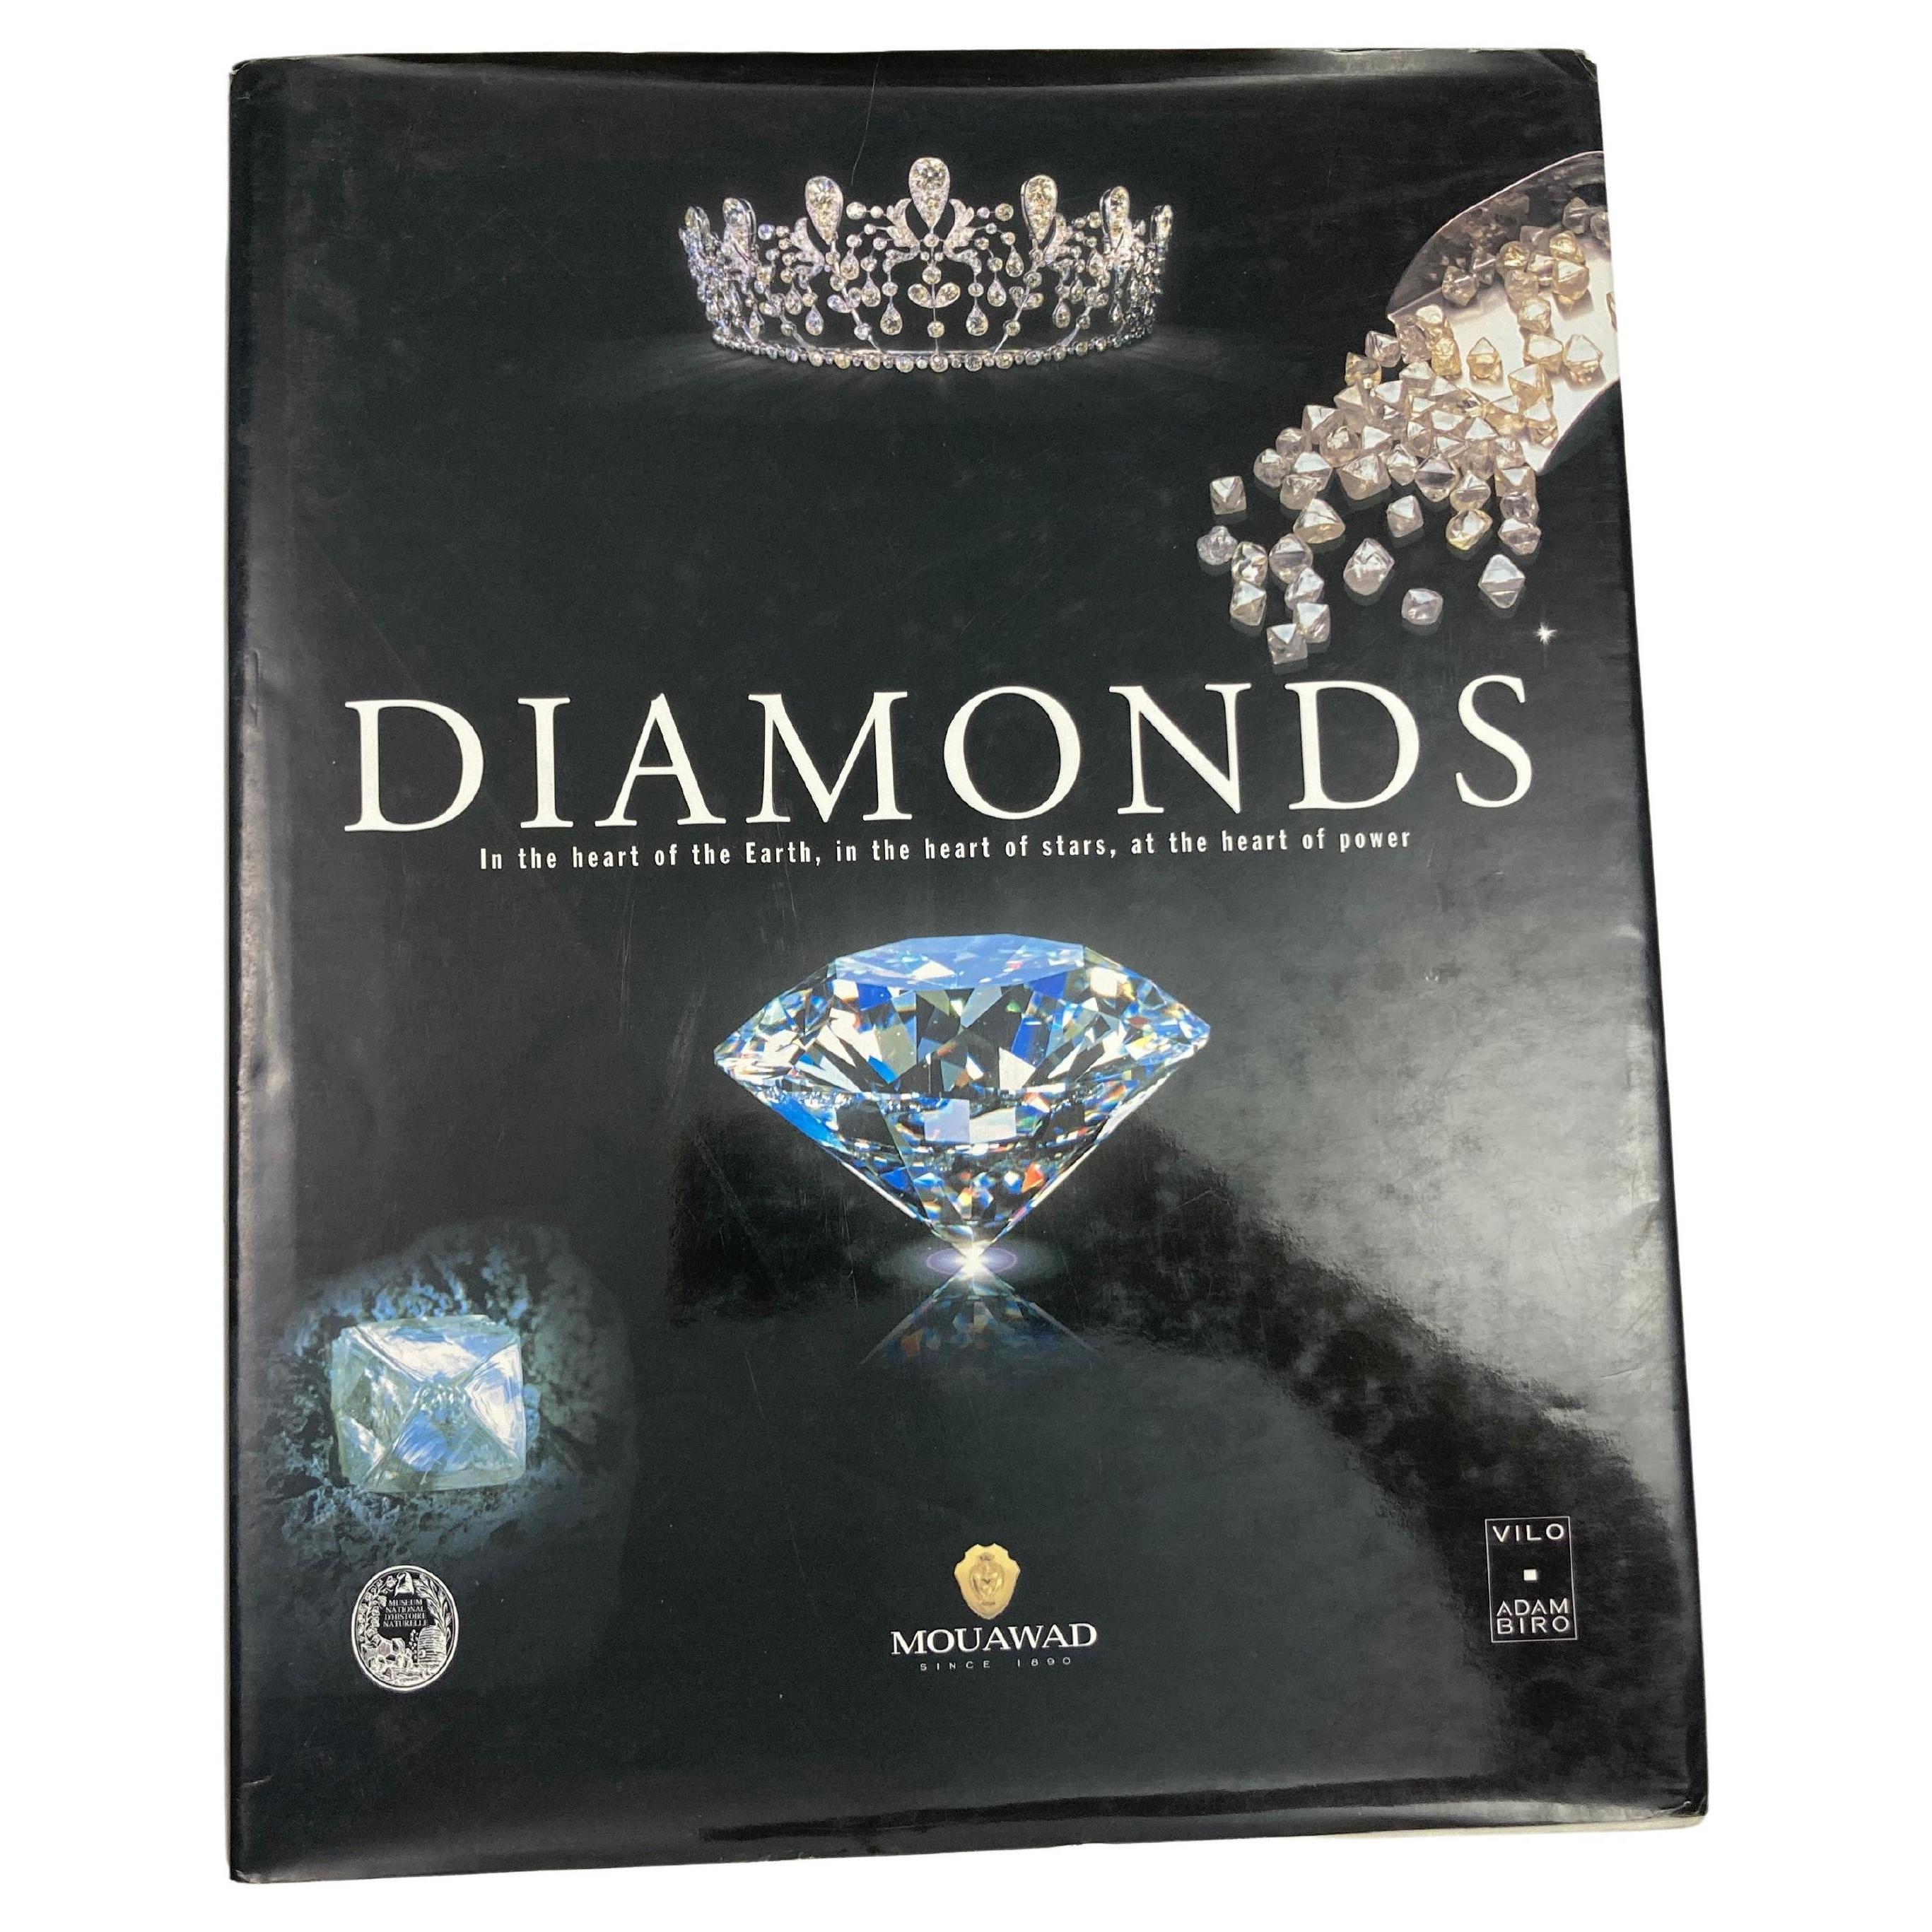 Diamonds: In the Heart of the Earth, in the Heart of Stars, at the Heart of Power Hardcover Book.Mouawad first edition december 1, 2001 by Hubert Bari (Author), Violaine Sautter (Author).Patrick Absalon, Hubert Bari, Michele Bimbenet-Privat, Robyn